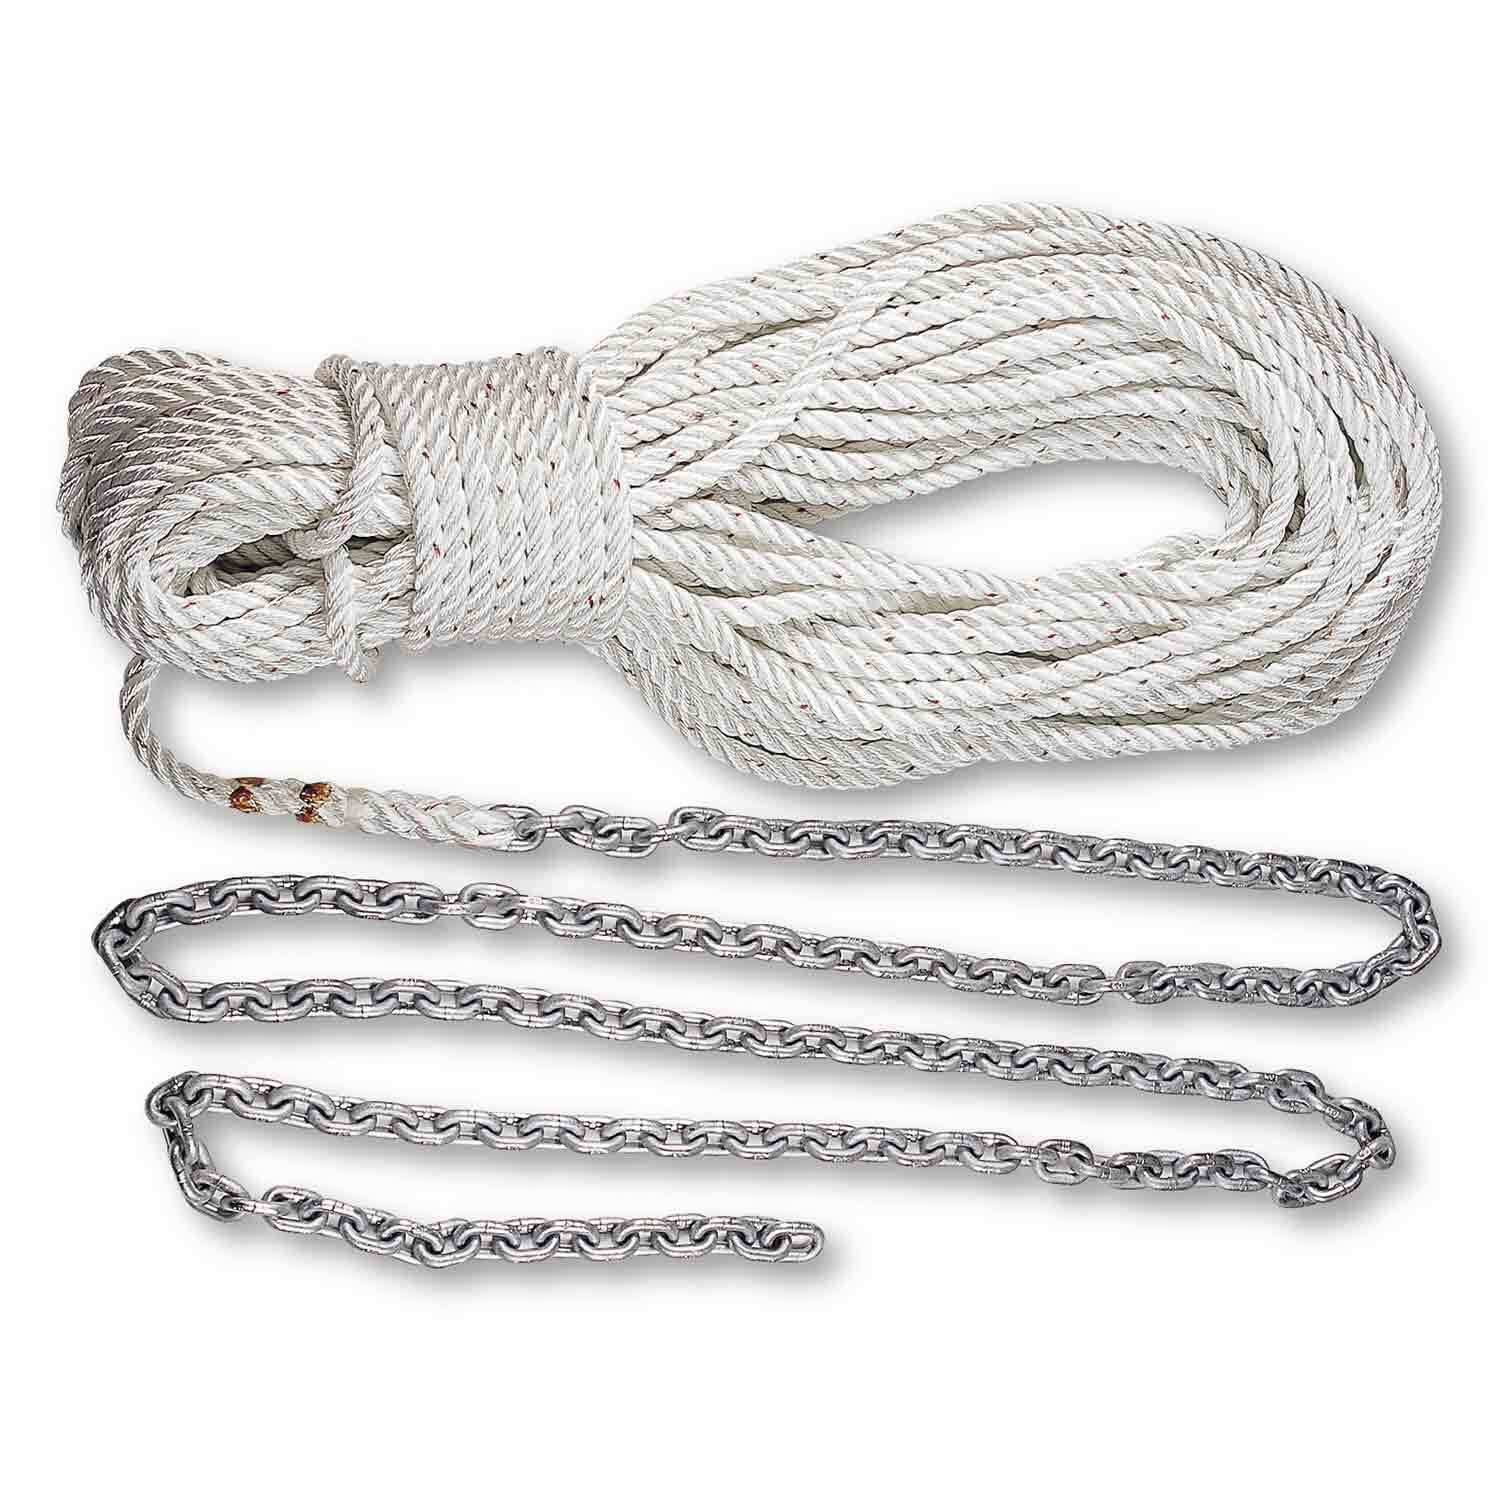 Yellow Hollow Braided 1/4" in x 50' ft Boat Marine Anchor Line Tie-Down Rope 1 